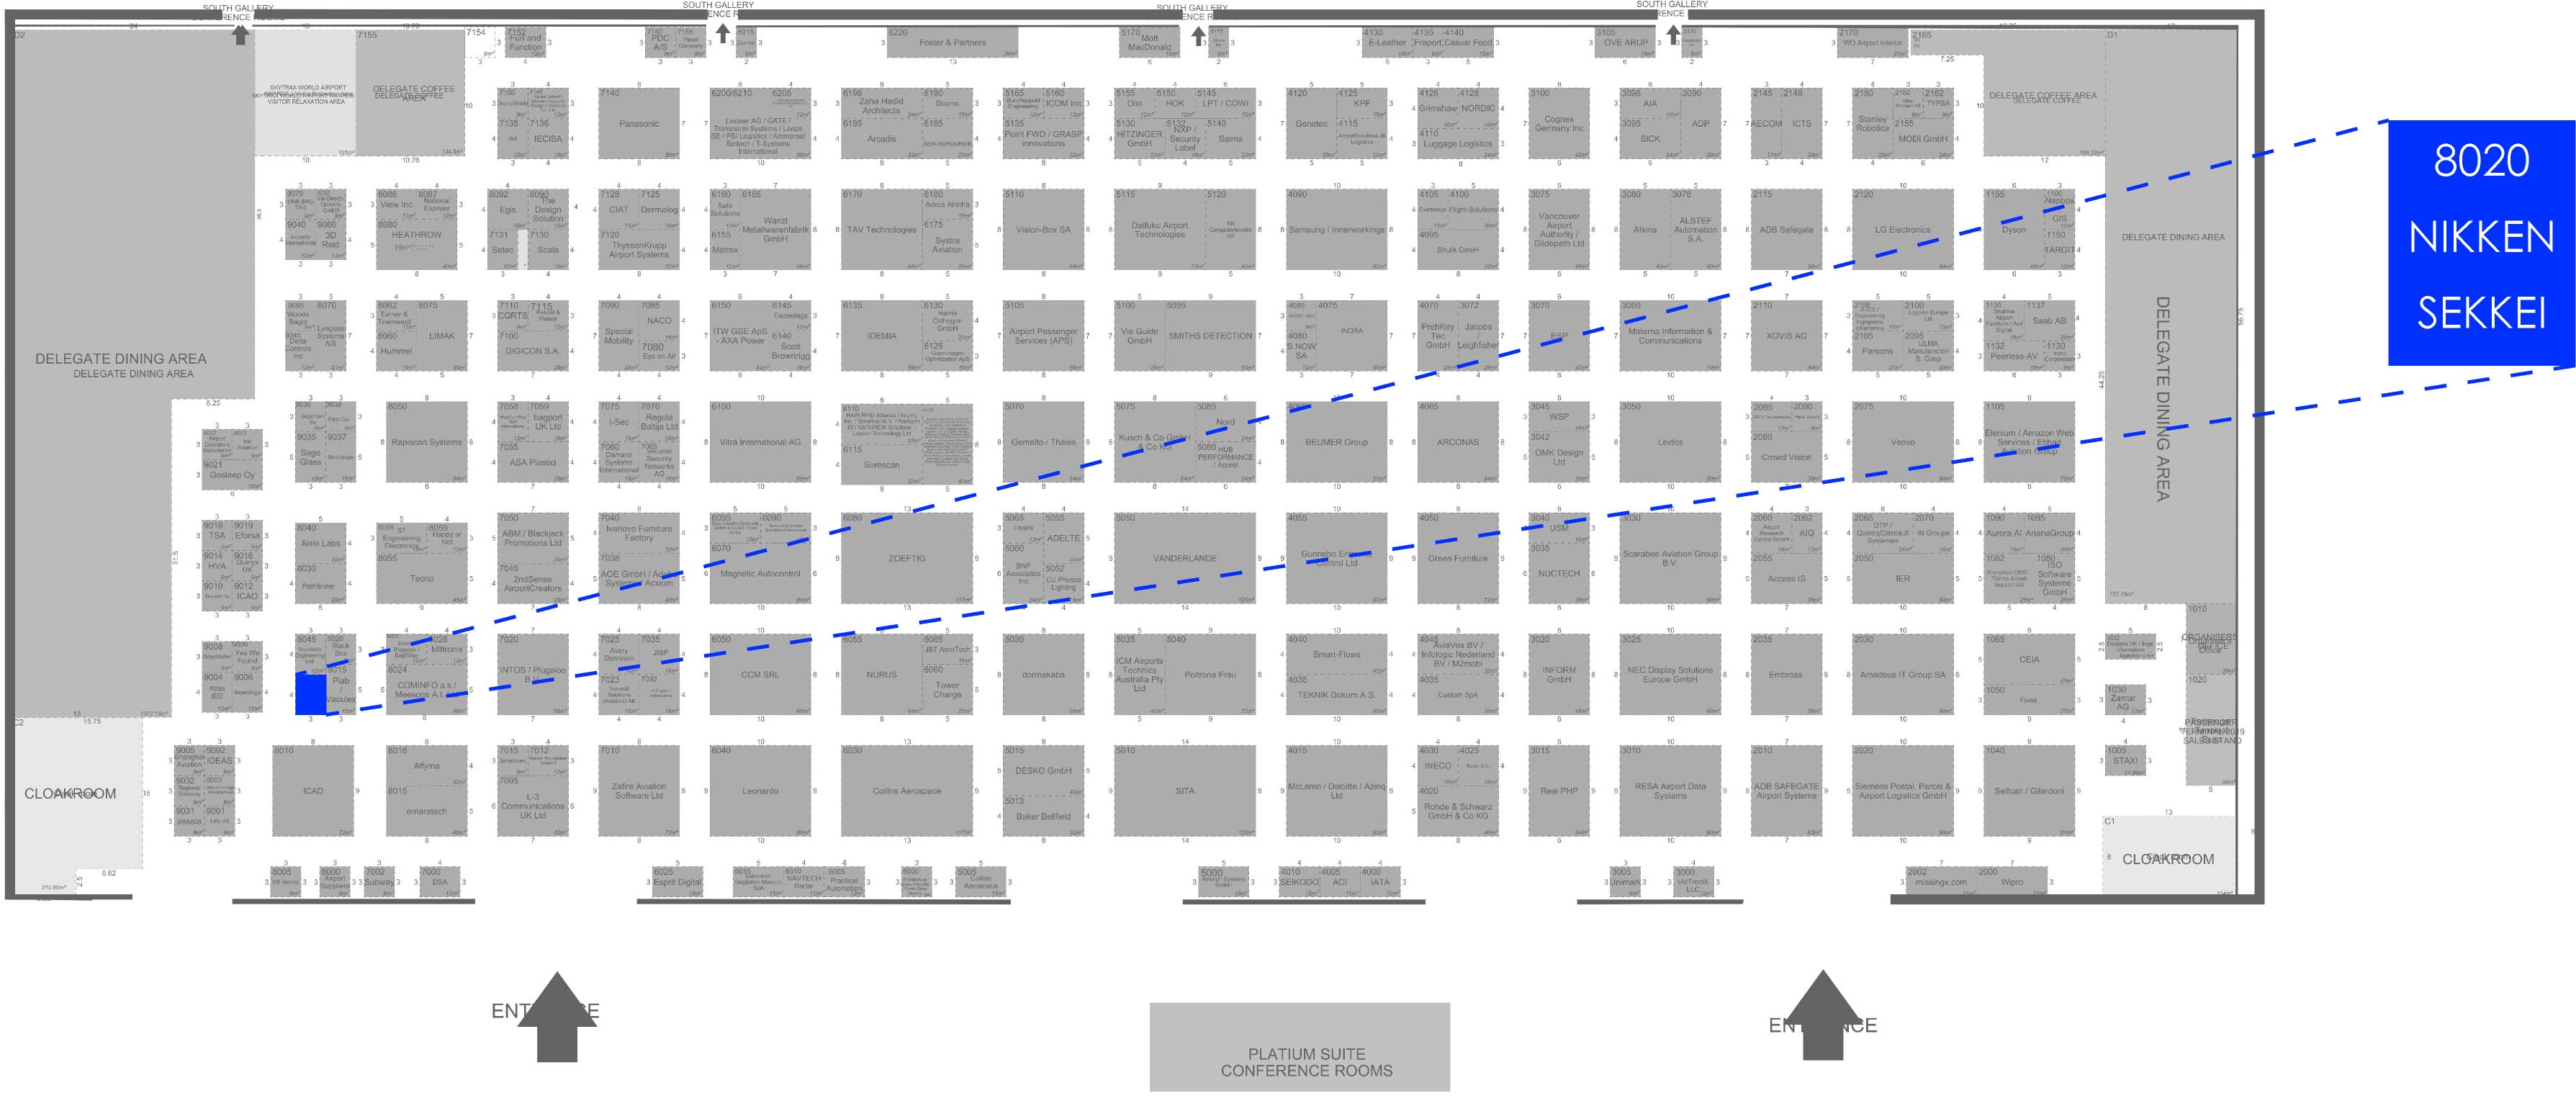 Floor Layout and Stand Location of NIKKEN SEKKEI